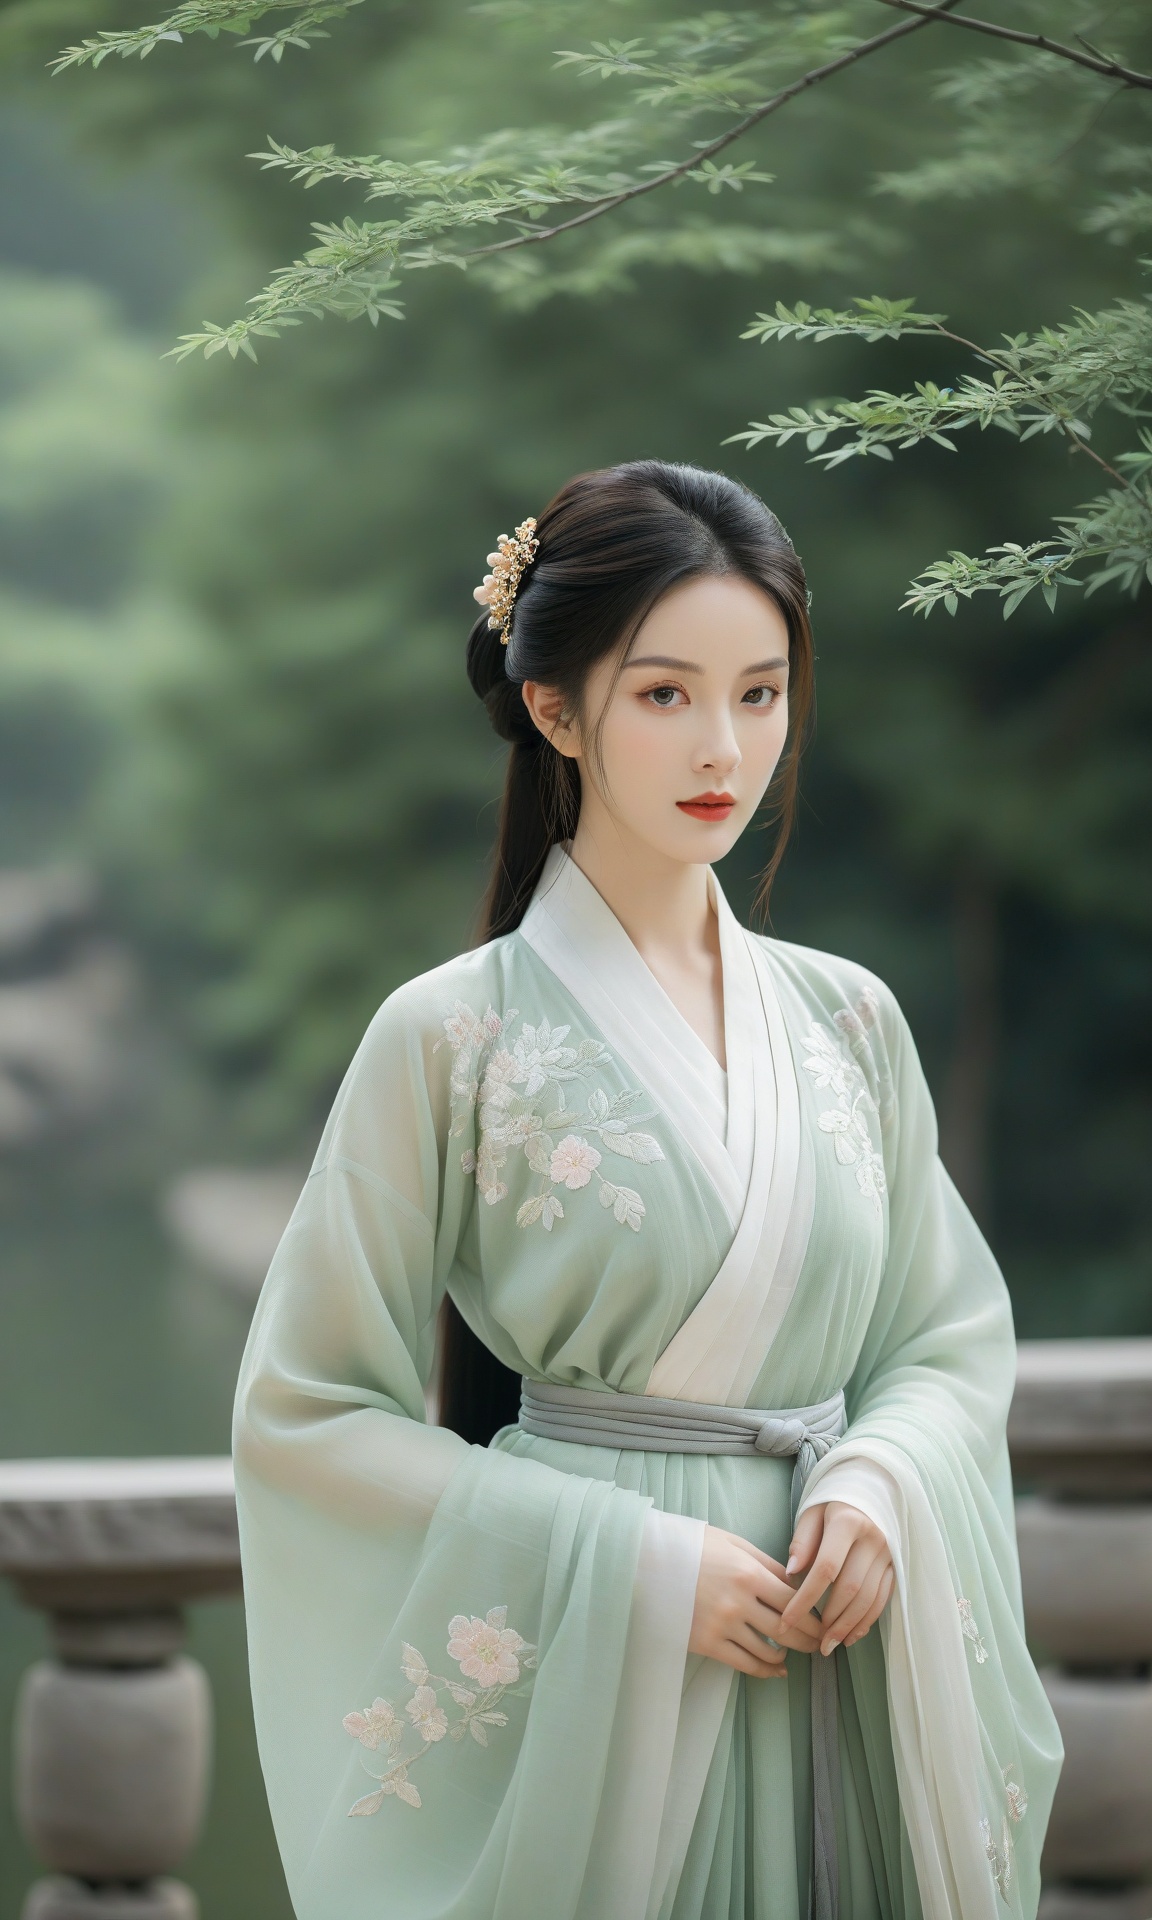 a woman, hanfu, the woman's gaze is directed towards the camera, her posture is upright and poised, and her hands are gracefully positioned by her side. the environment is lush and green, suggesting a serene and natural setting. the hanfu is flowing and drapes elegantly around her, with intricate embroidery and patterns. the overall mood conveyed is one of elegance, tradition, and serenity.